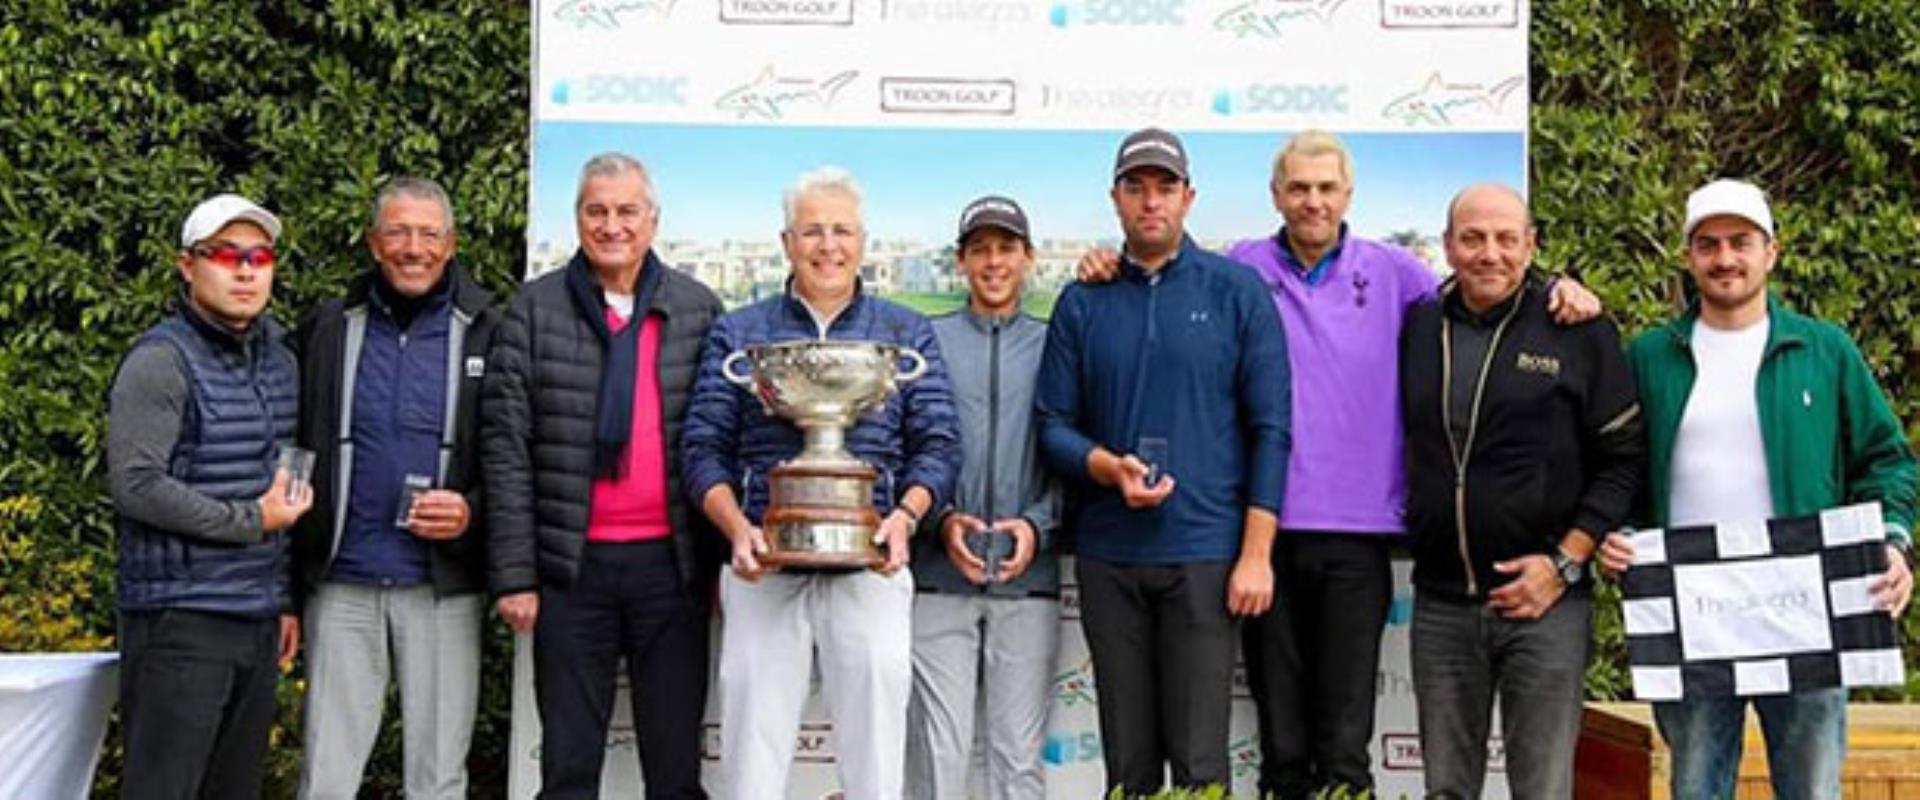 El-Shafei Wins Back the title of Egyptian Amateur Open Champion